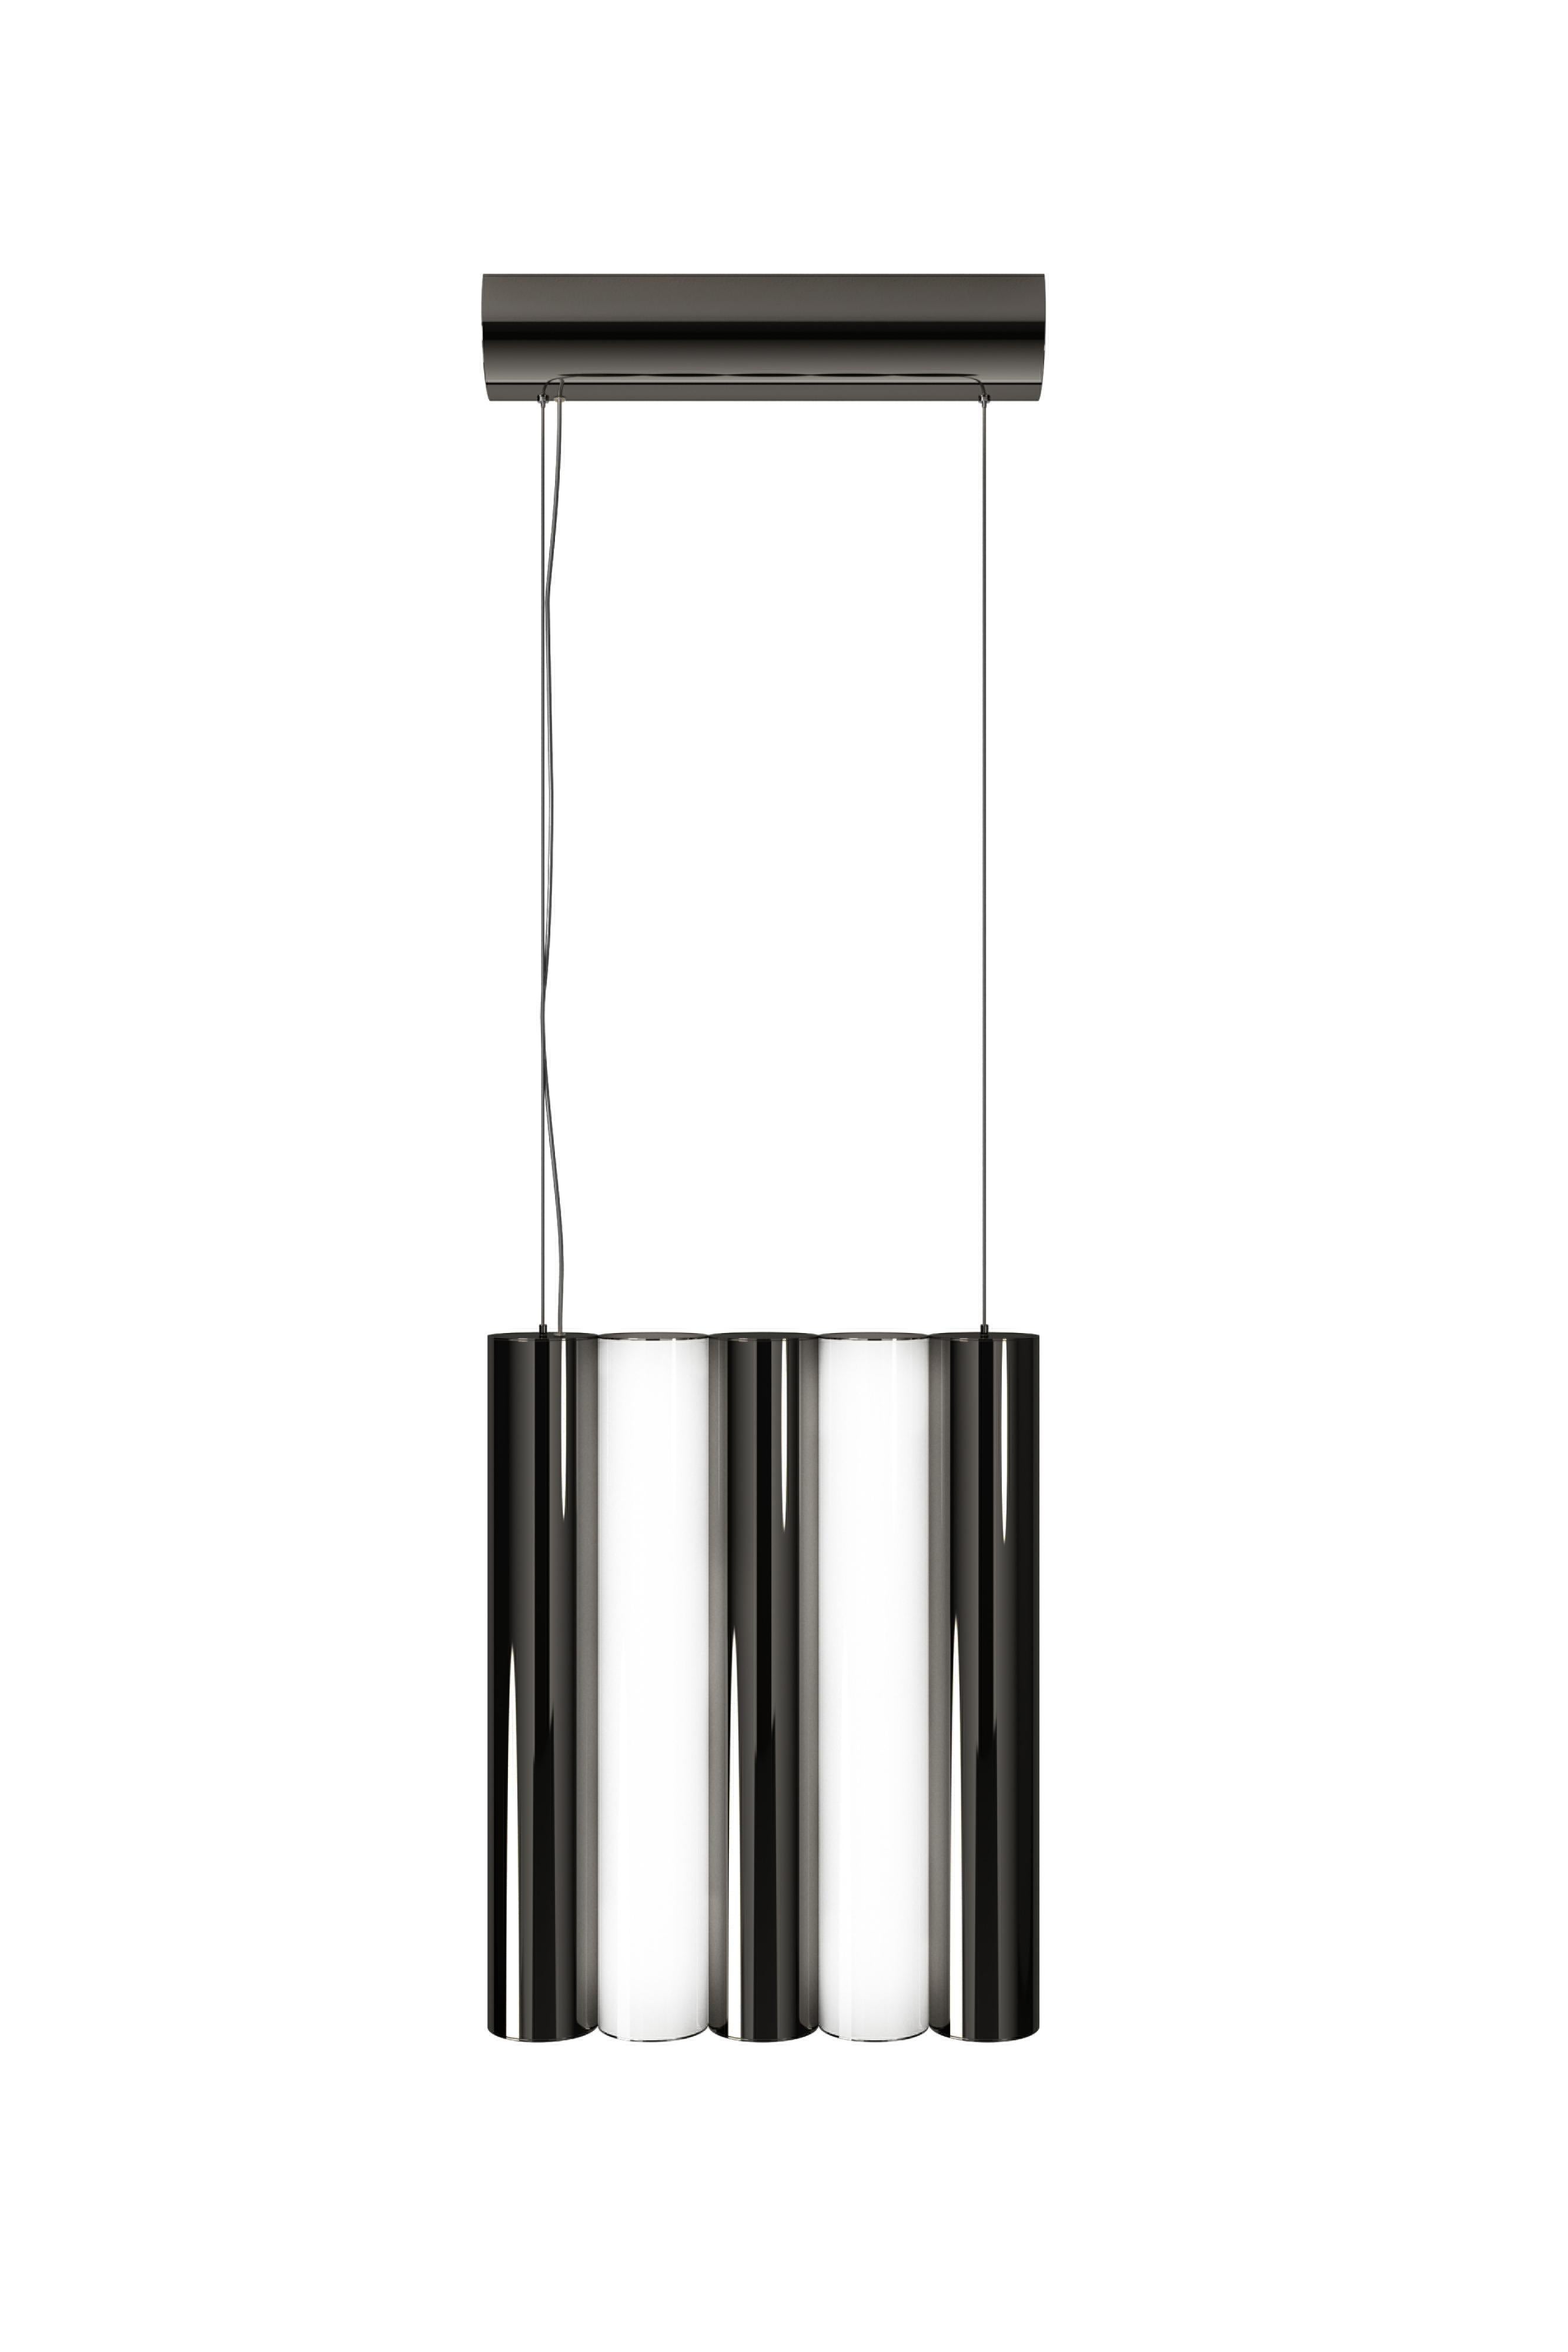 Gamma L5 graphite pendant by Sylvain Willenz
Dimensions: D 25 x W 5 X H 42.3 cm
Materials: solid brass, white polycarbonate diffuser, metal cable and transparent electric cable.
Others finishes and dimensions are available.

All our lamps can